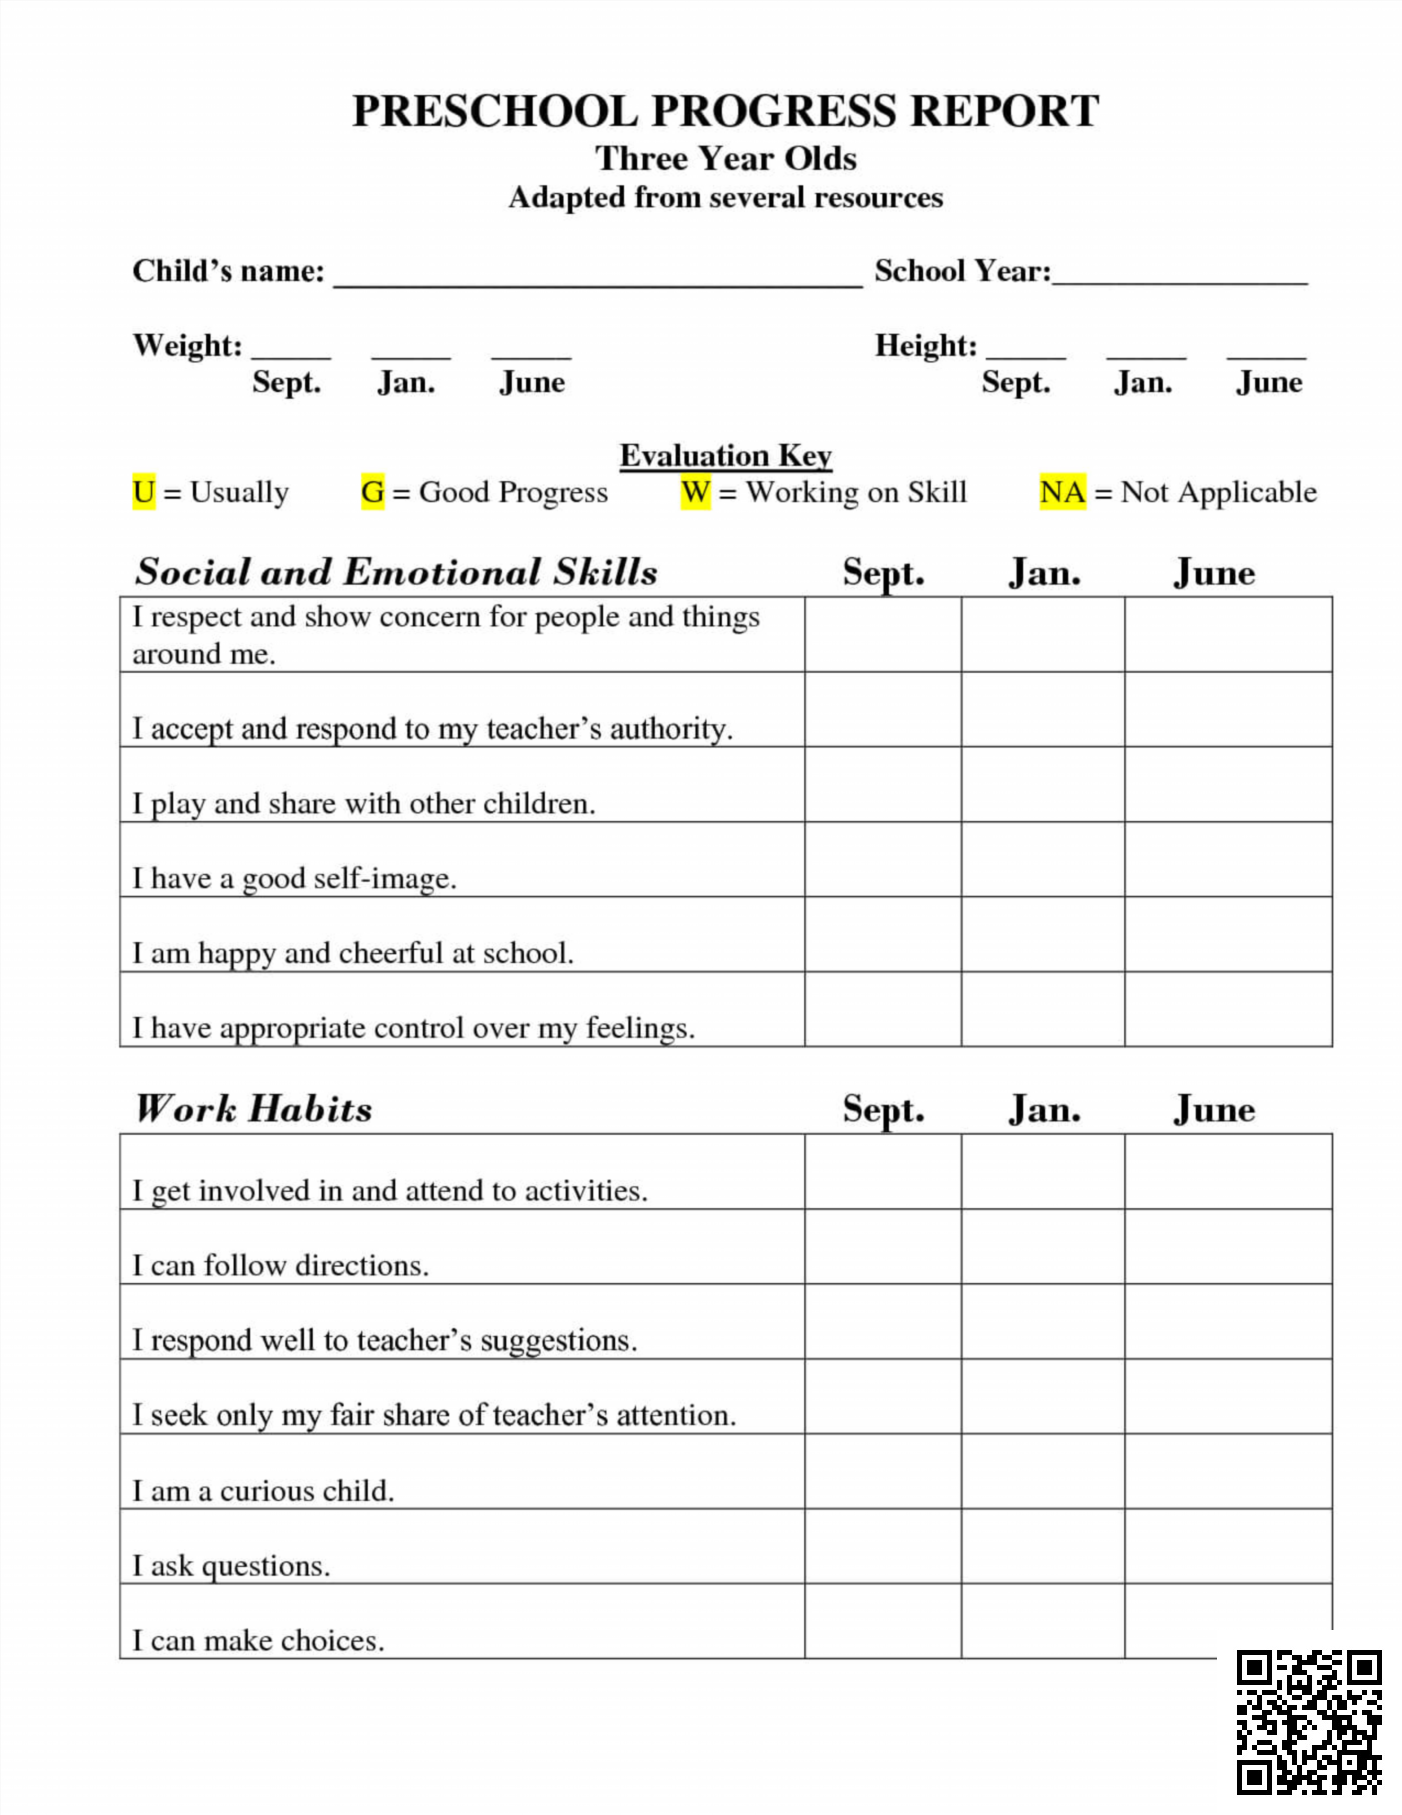 Free Work Progress report template (Project, Daily, Weekly ...